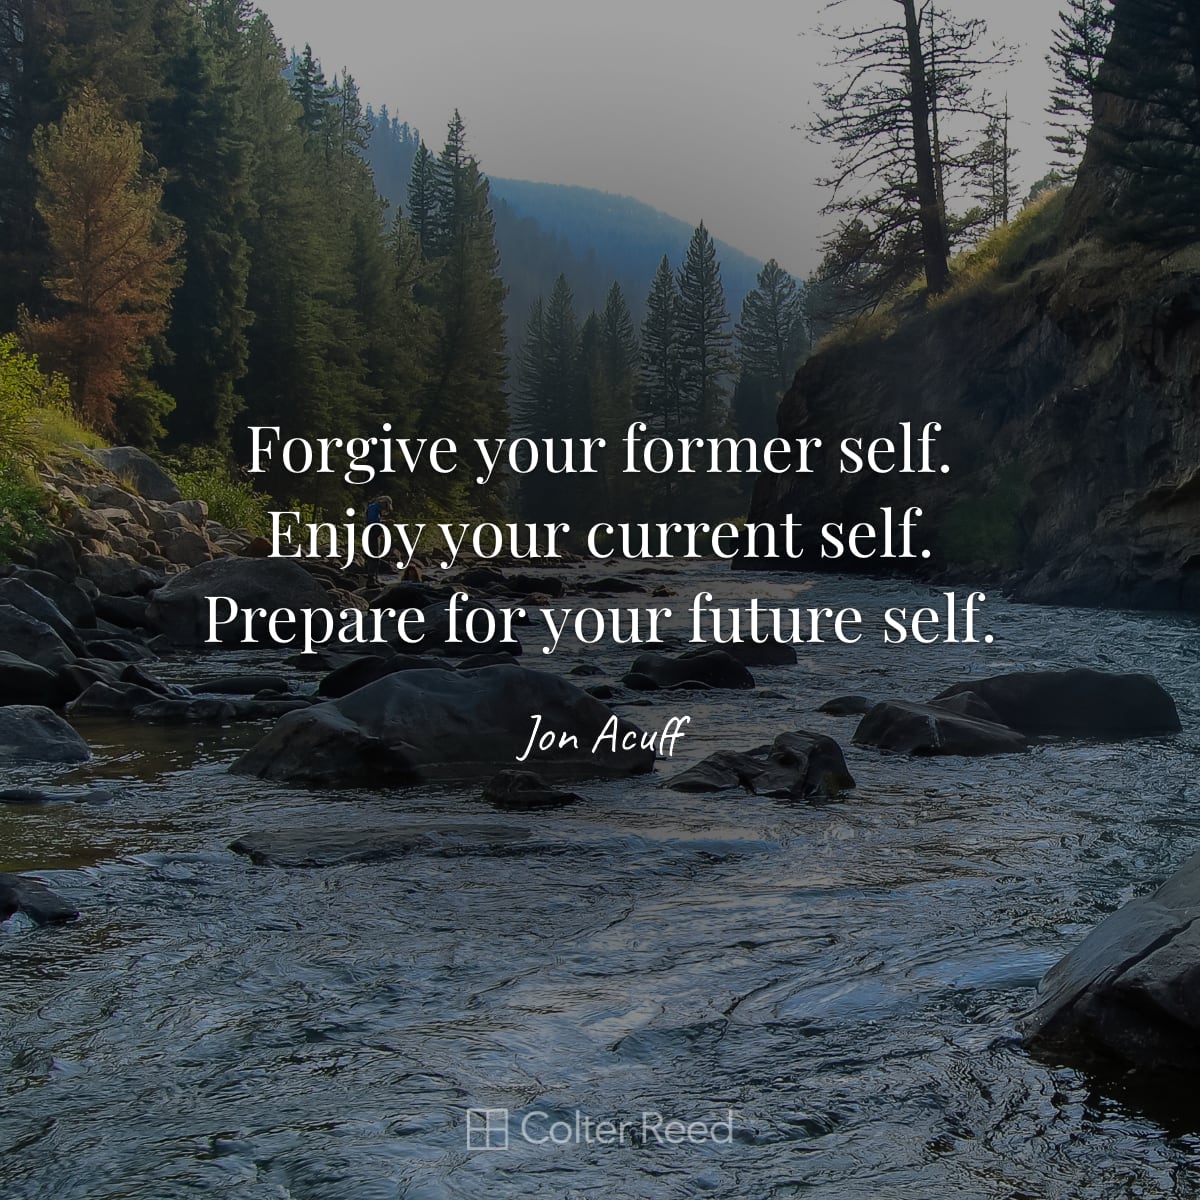 Forgive your former self. Enjoy your current self. Prepare for your future self. —Jon Acuff